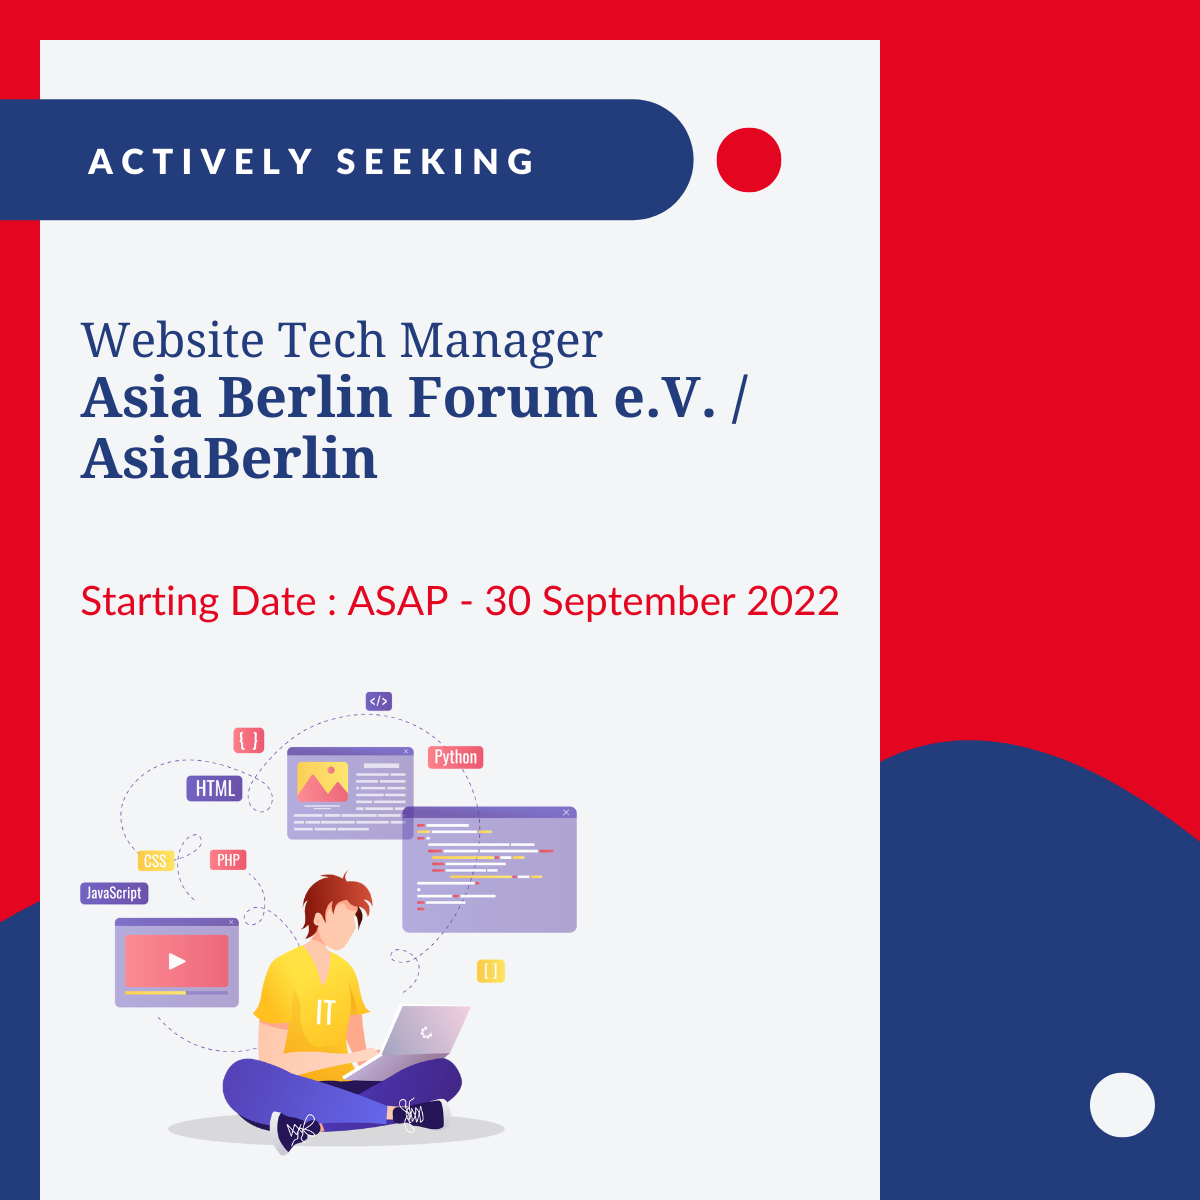 Temporary Contract : Looking for a Webmaster to support the AsiaBerlin team!